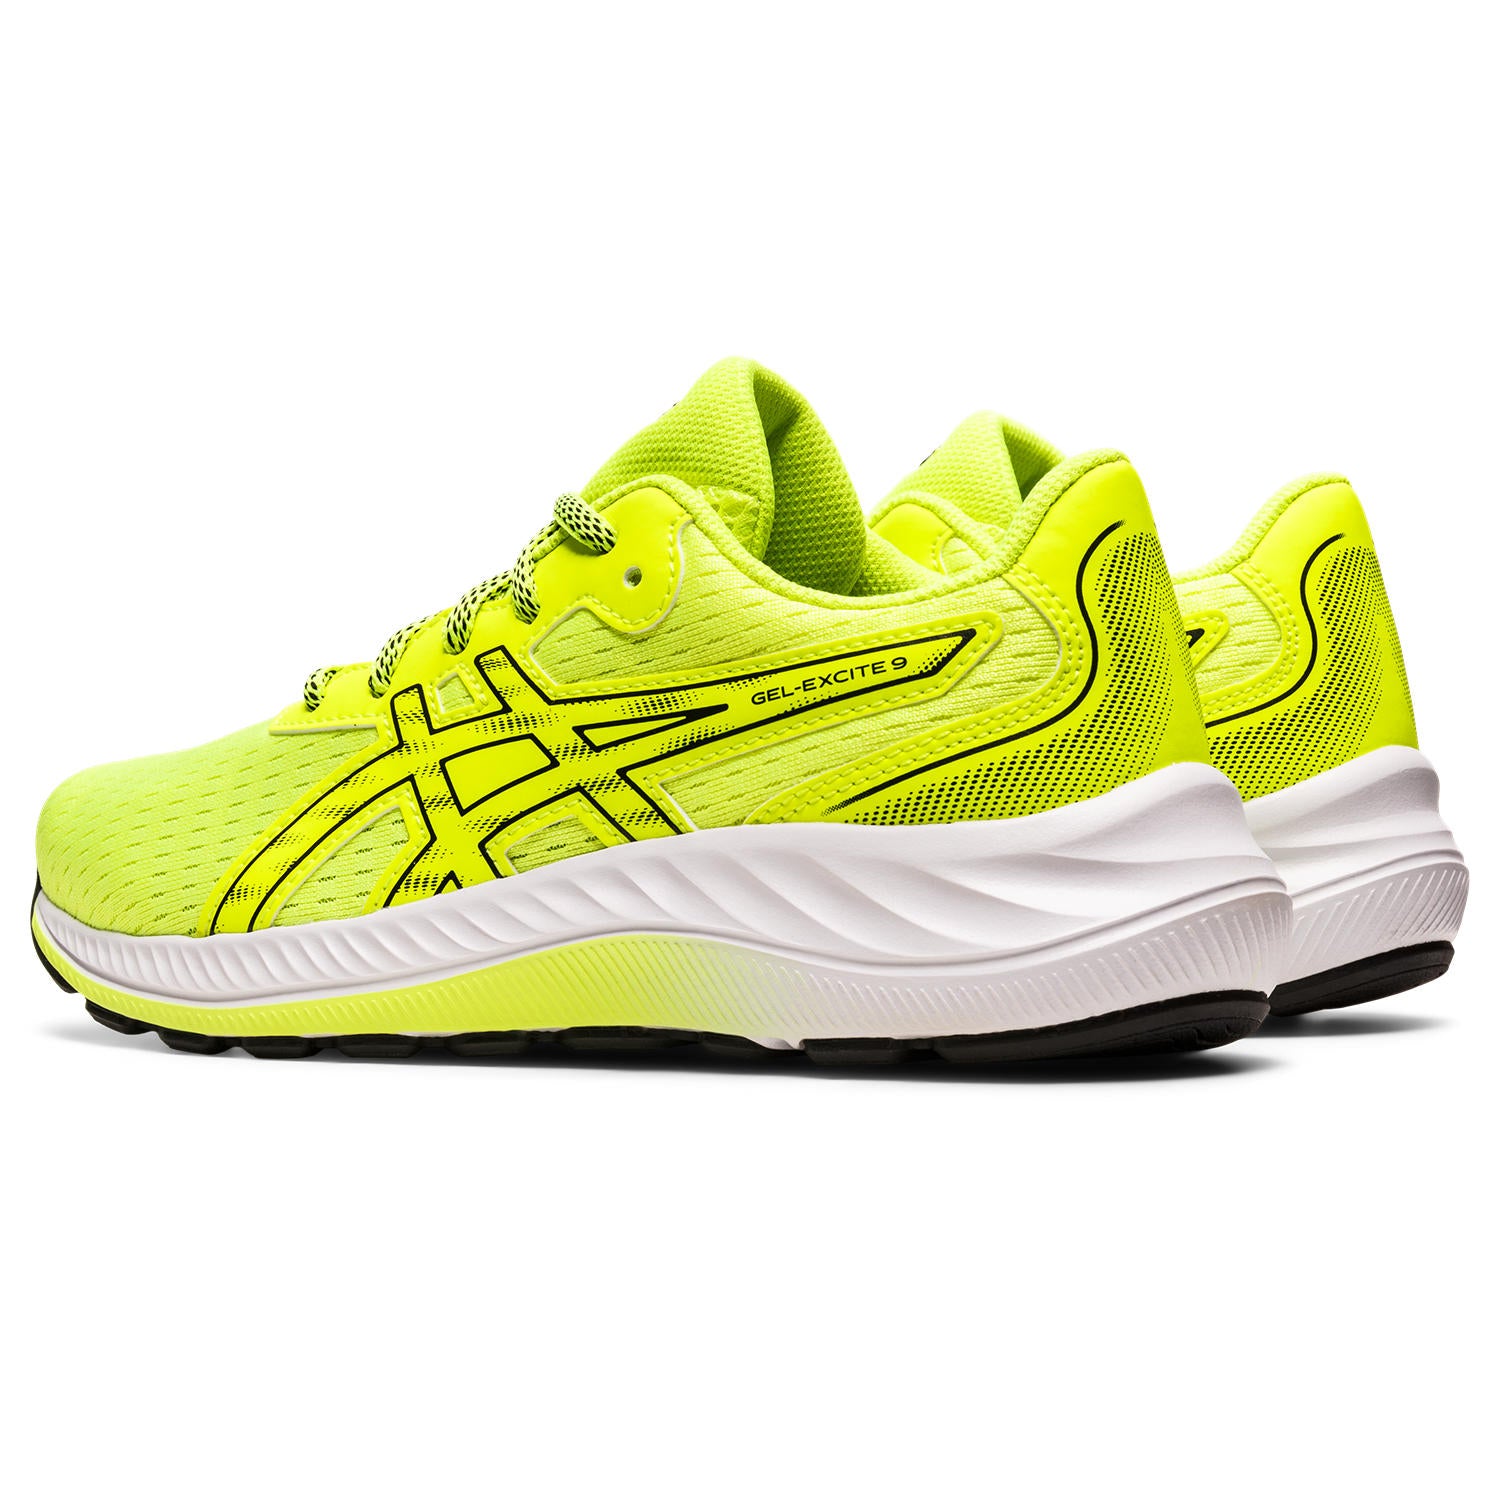 GEL-EXCITE 9 GS (Safety Yellow/Black)